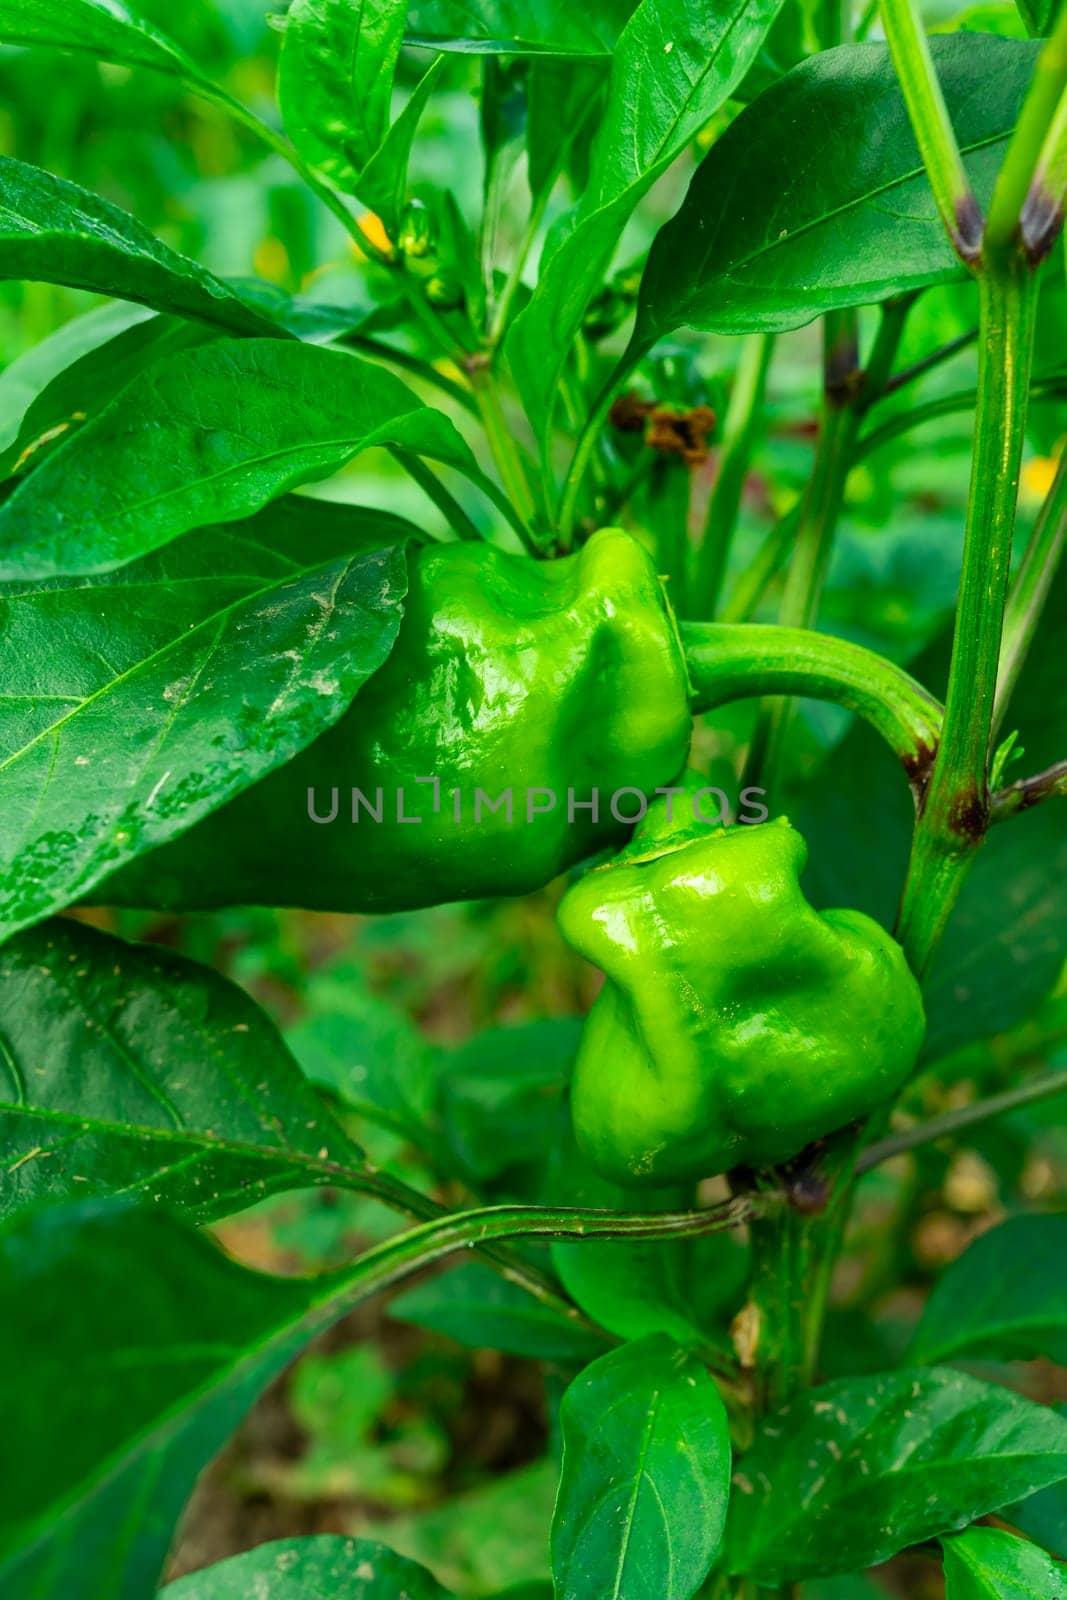 Cultivation of large green pepper in conditions of insufficient irrigation by Serhii_Voroshchuk